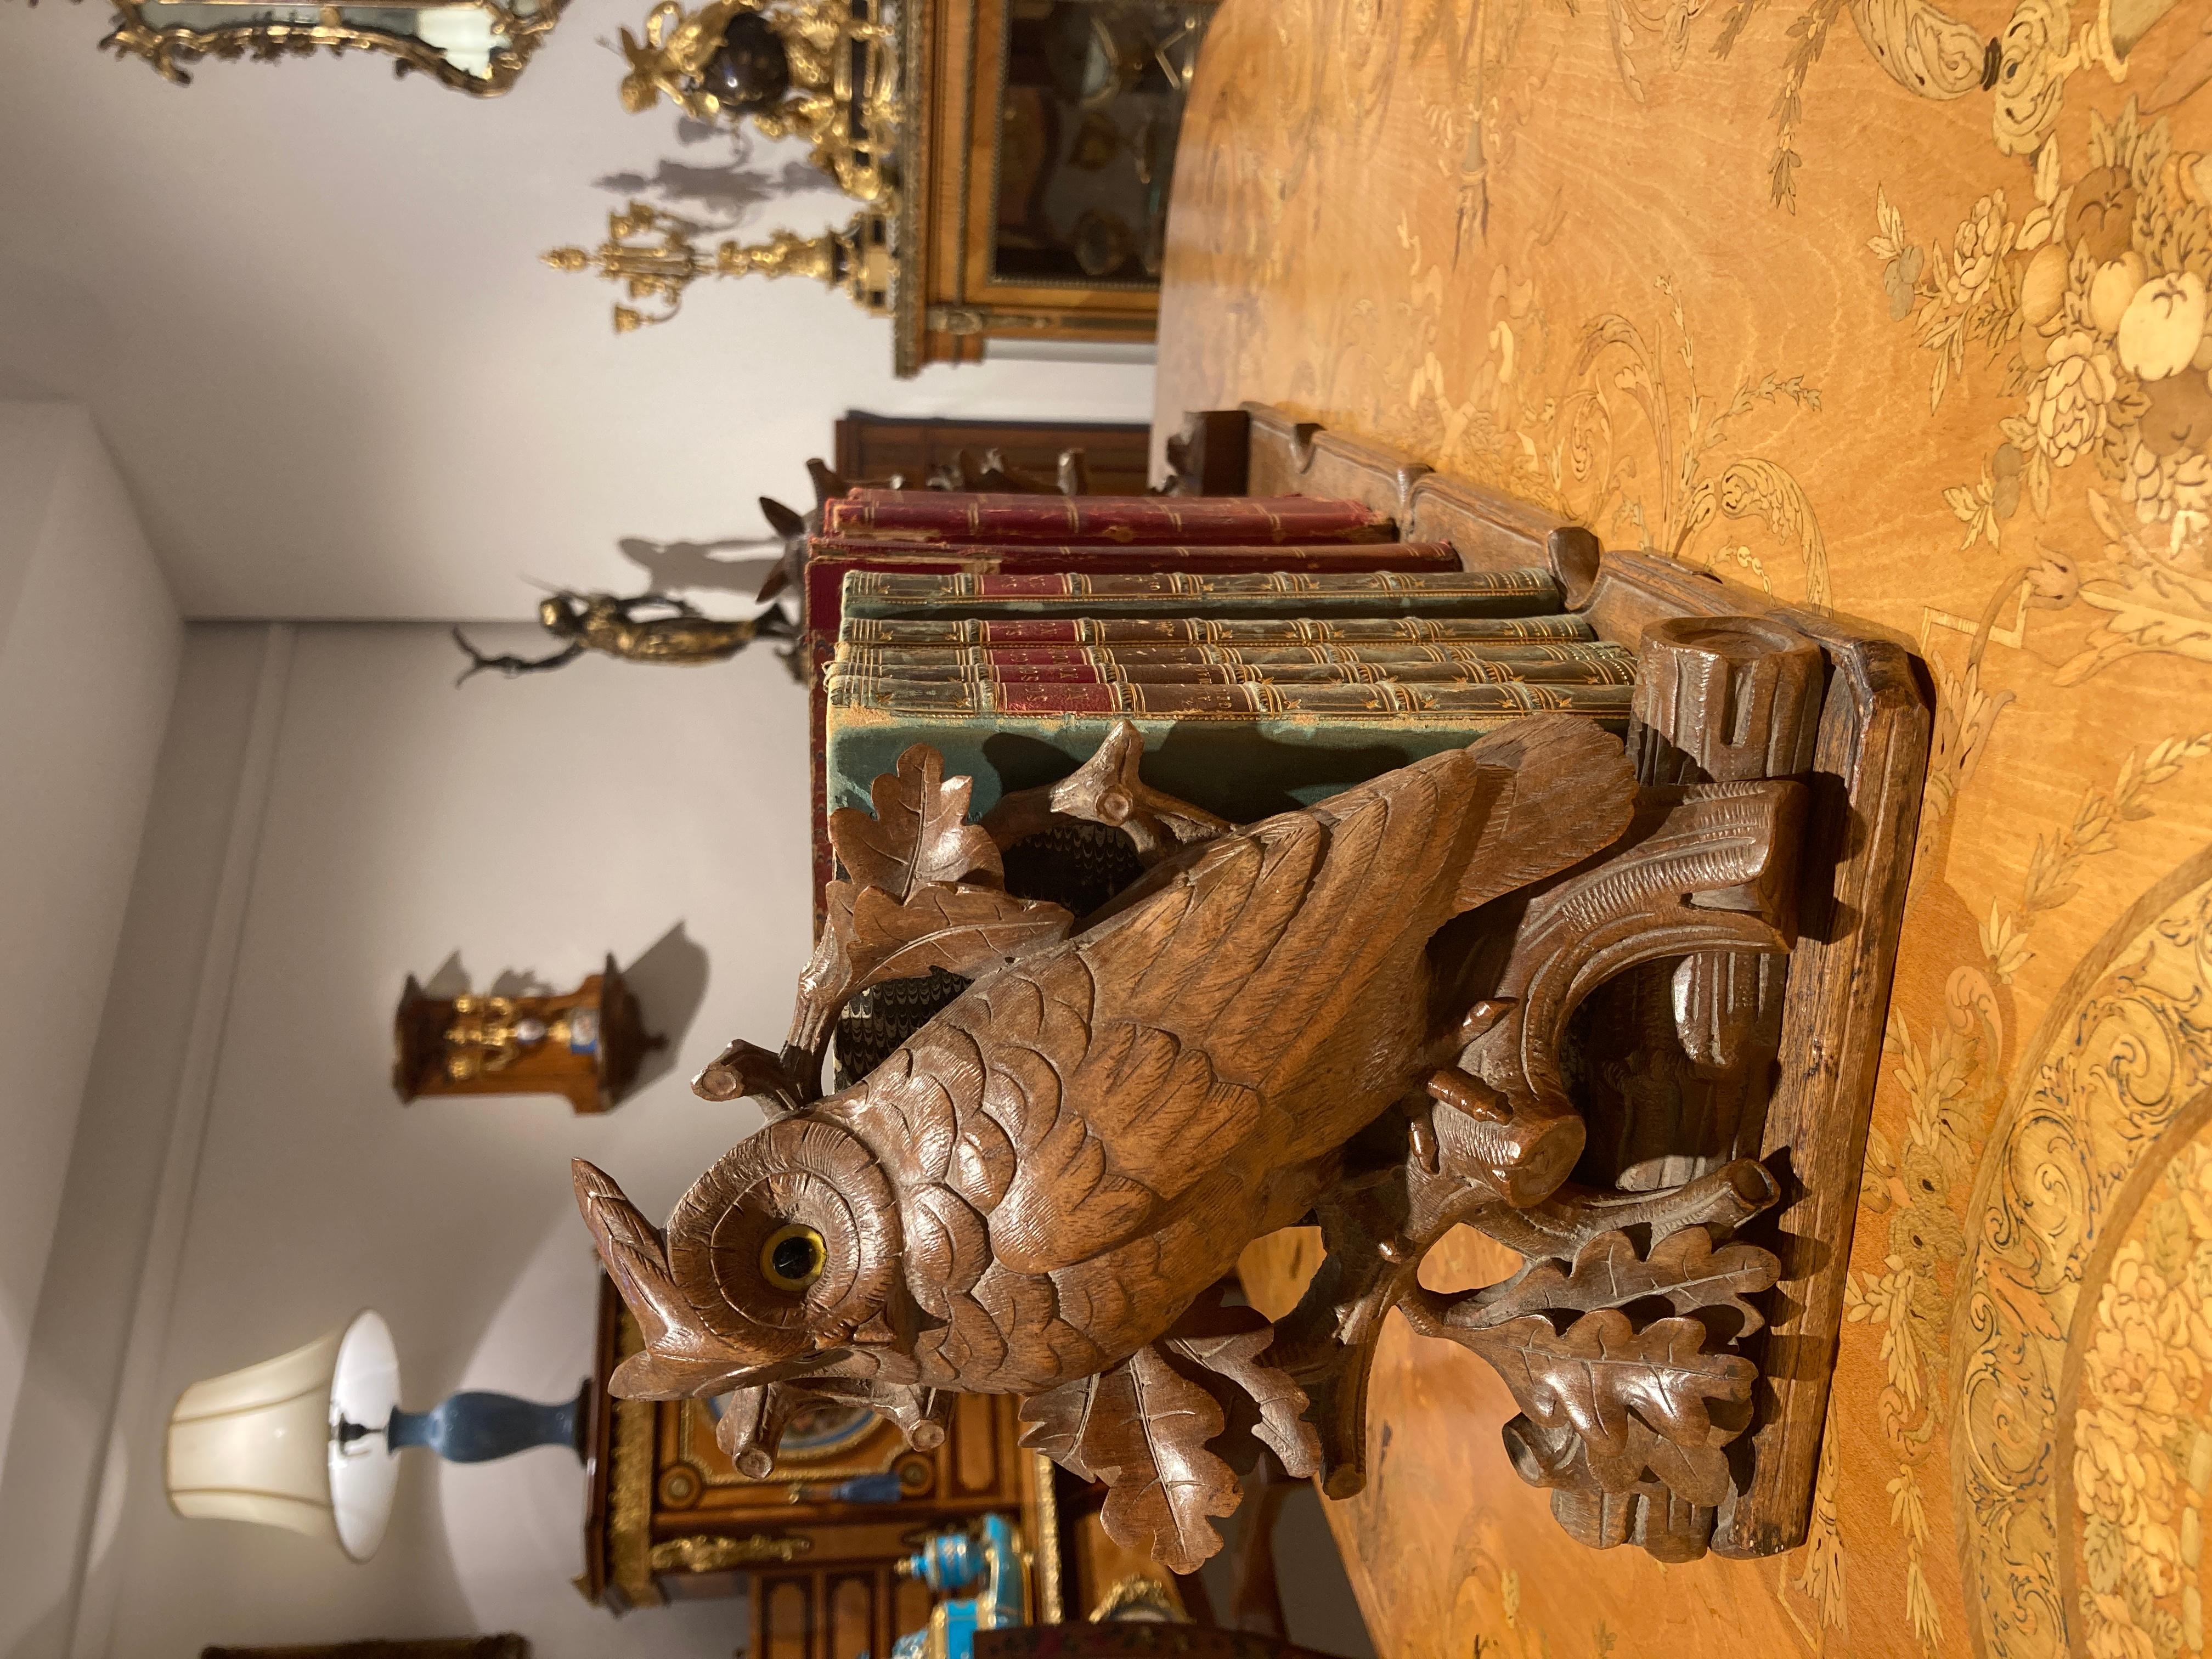 A whimsical black forest book rack

Of adjustable form, constructed in carved Lime wood, having horned owls with glass eyes, set on the folding uprights, and carved with foliates.

Provenance: Brienz, Bernese Oberland, Switzerland

Brienz, in